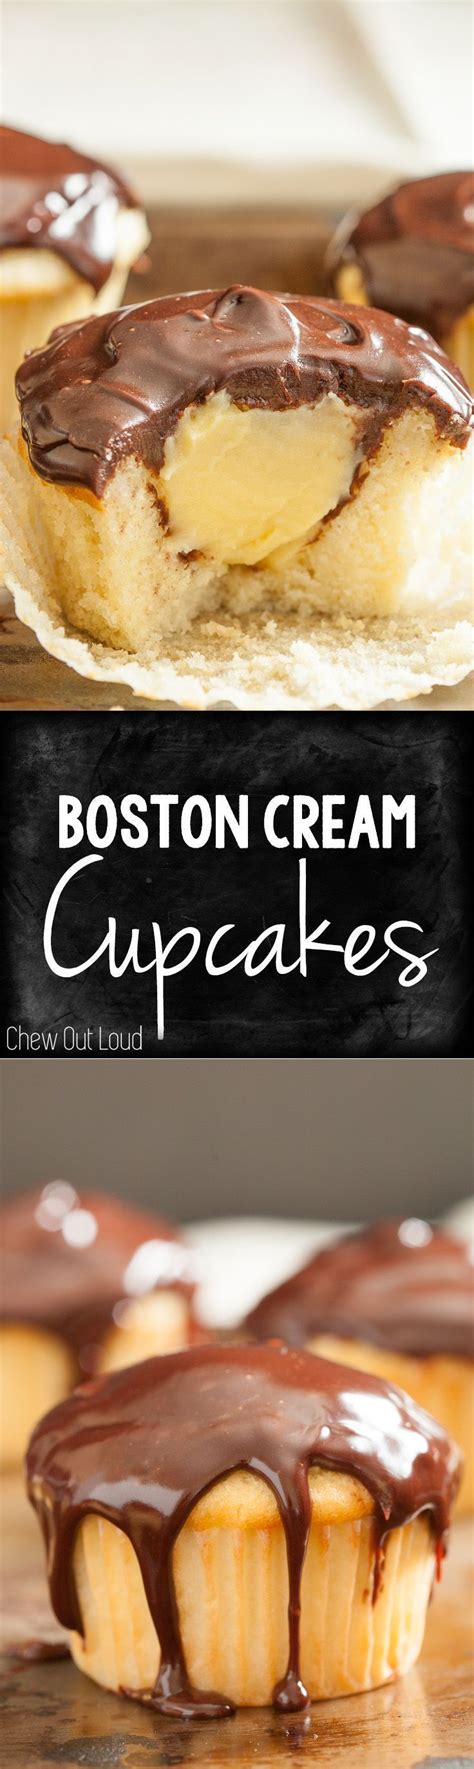 While the cupcakes cool, make the pastry cream. Boston Cream Cupcakes | Chew Out Loud | Recipe | Desserts ...